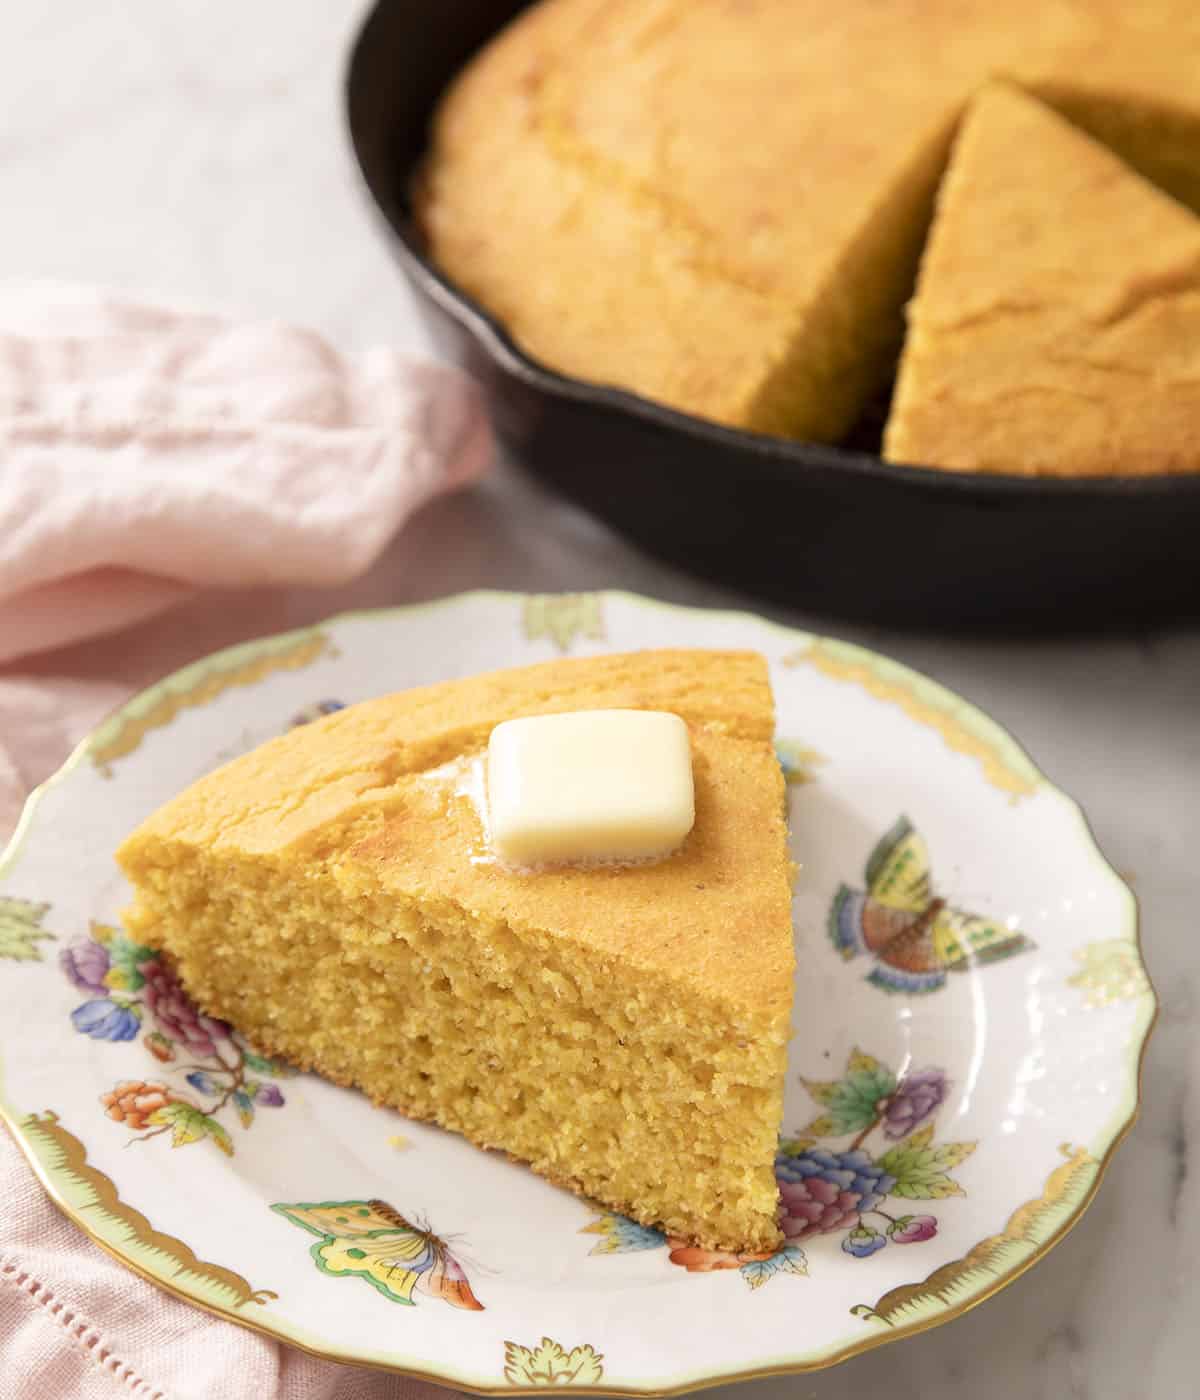 A wedgee-shaoped piece of cornbread on a plate in front of a round loaf.